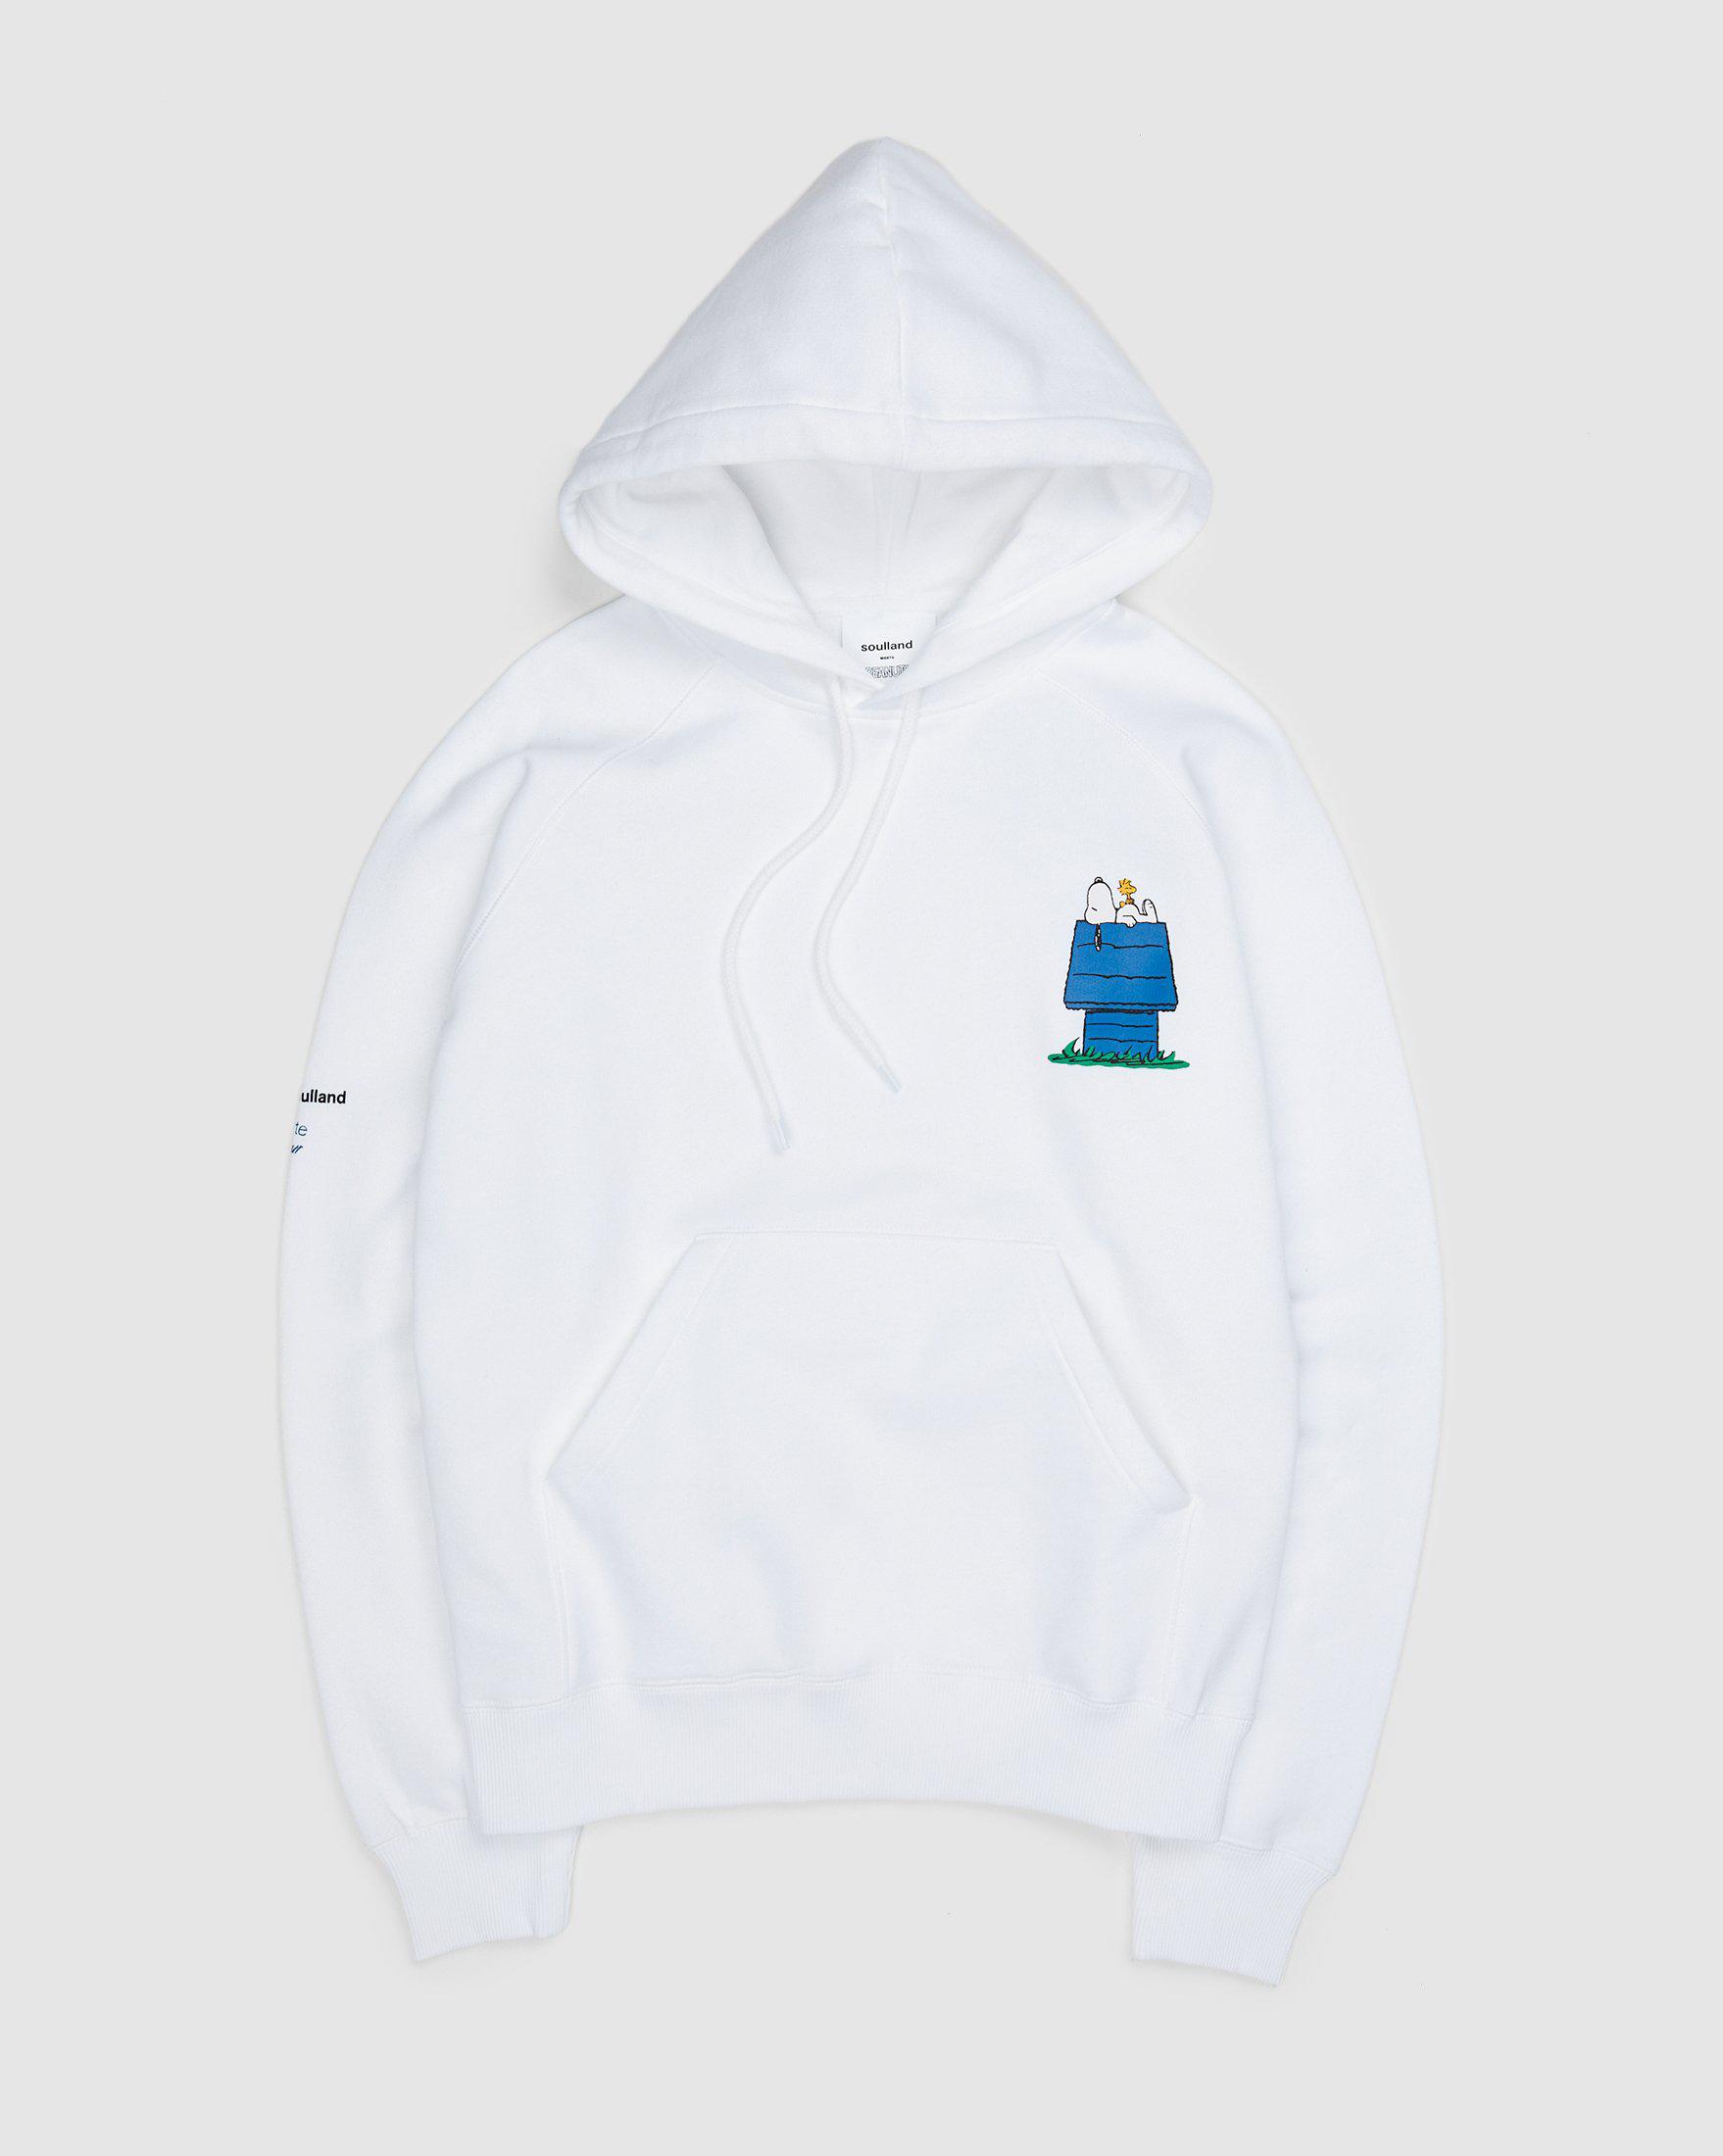 Colette Mon Amour x Soulland – Snoopy Bed White Hoodie by COLETTE MON AMOUR X SOULLAND